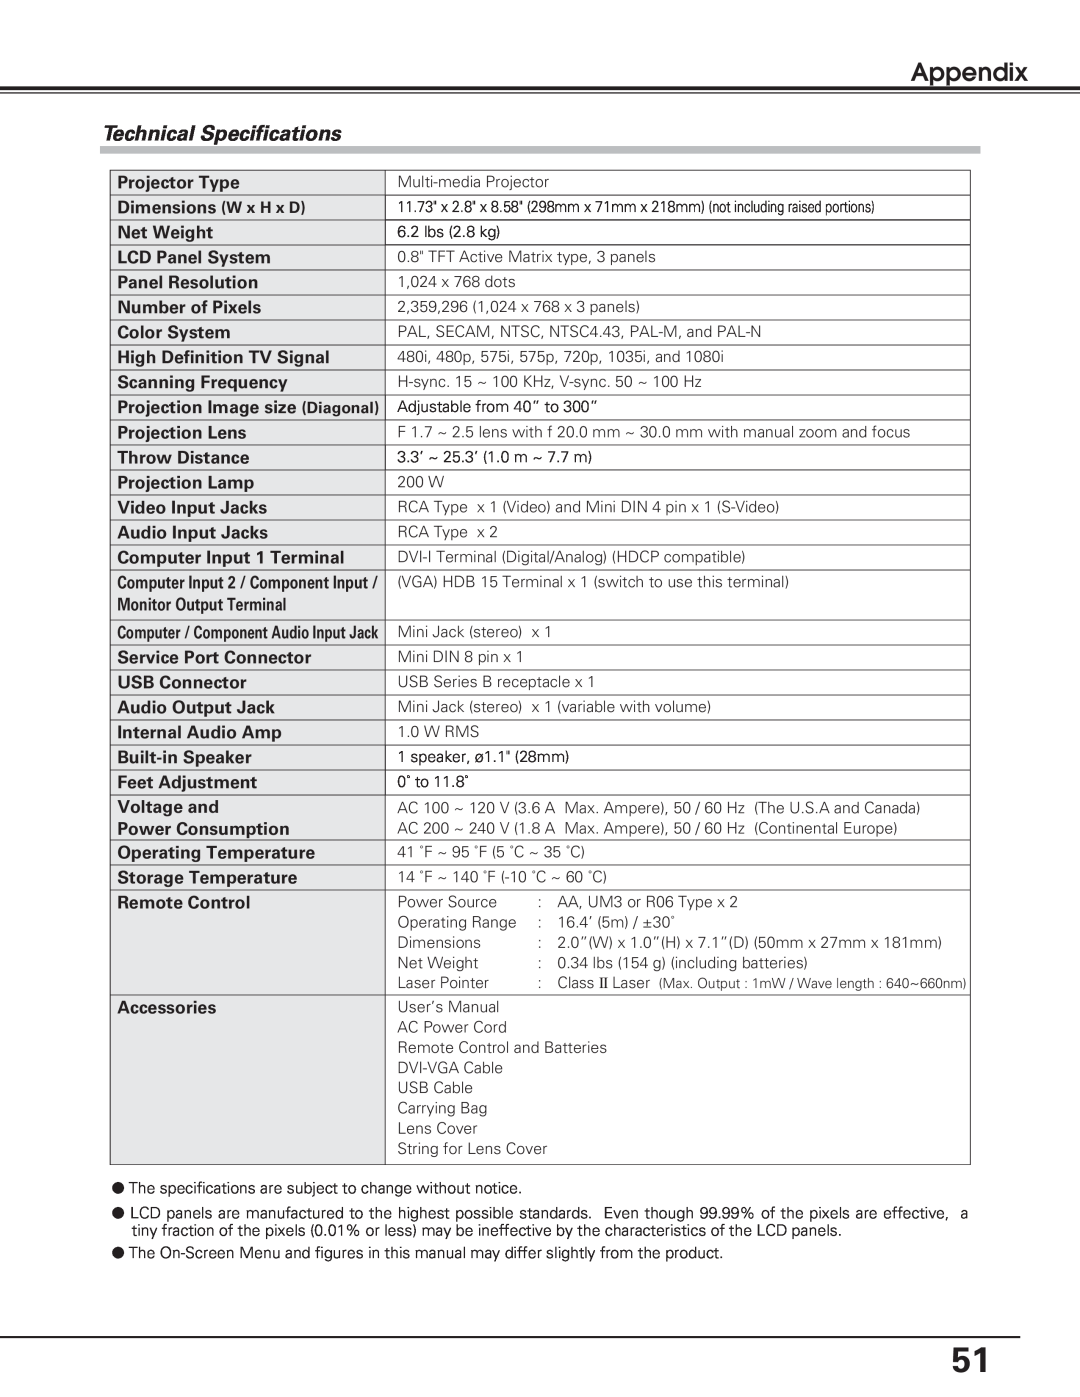 Christie Digital Systems 38-VIV208-01 user manual Technical Specifications, Appendix 